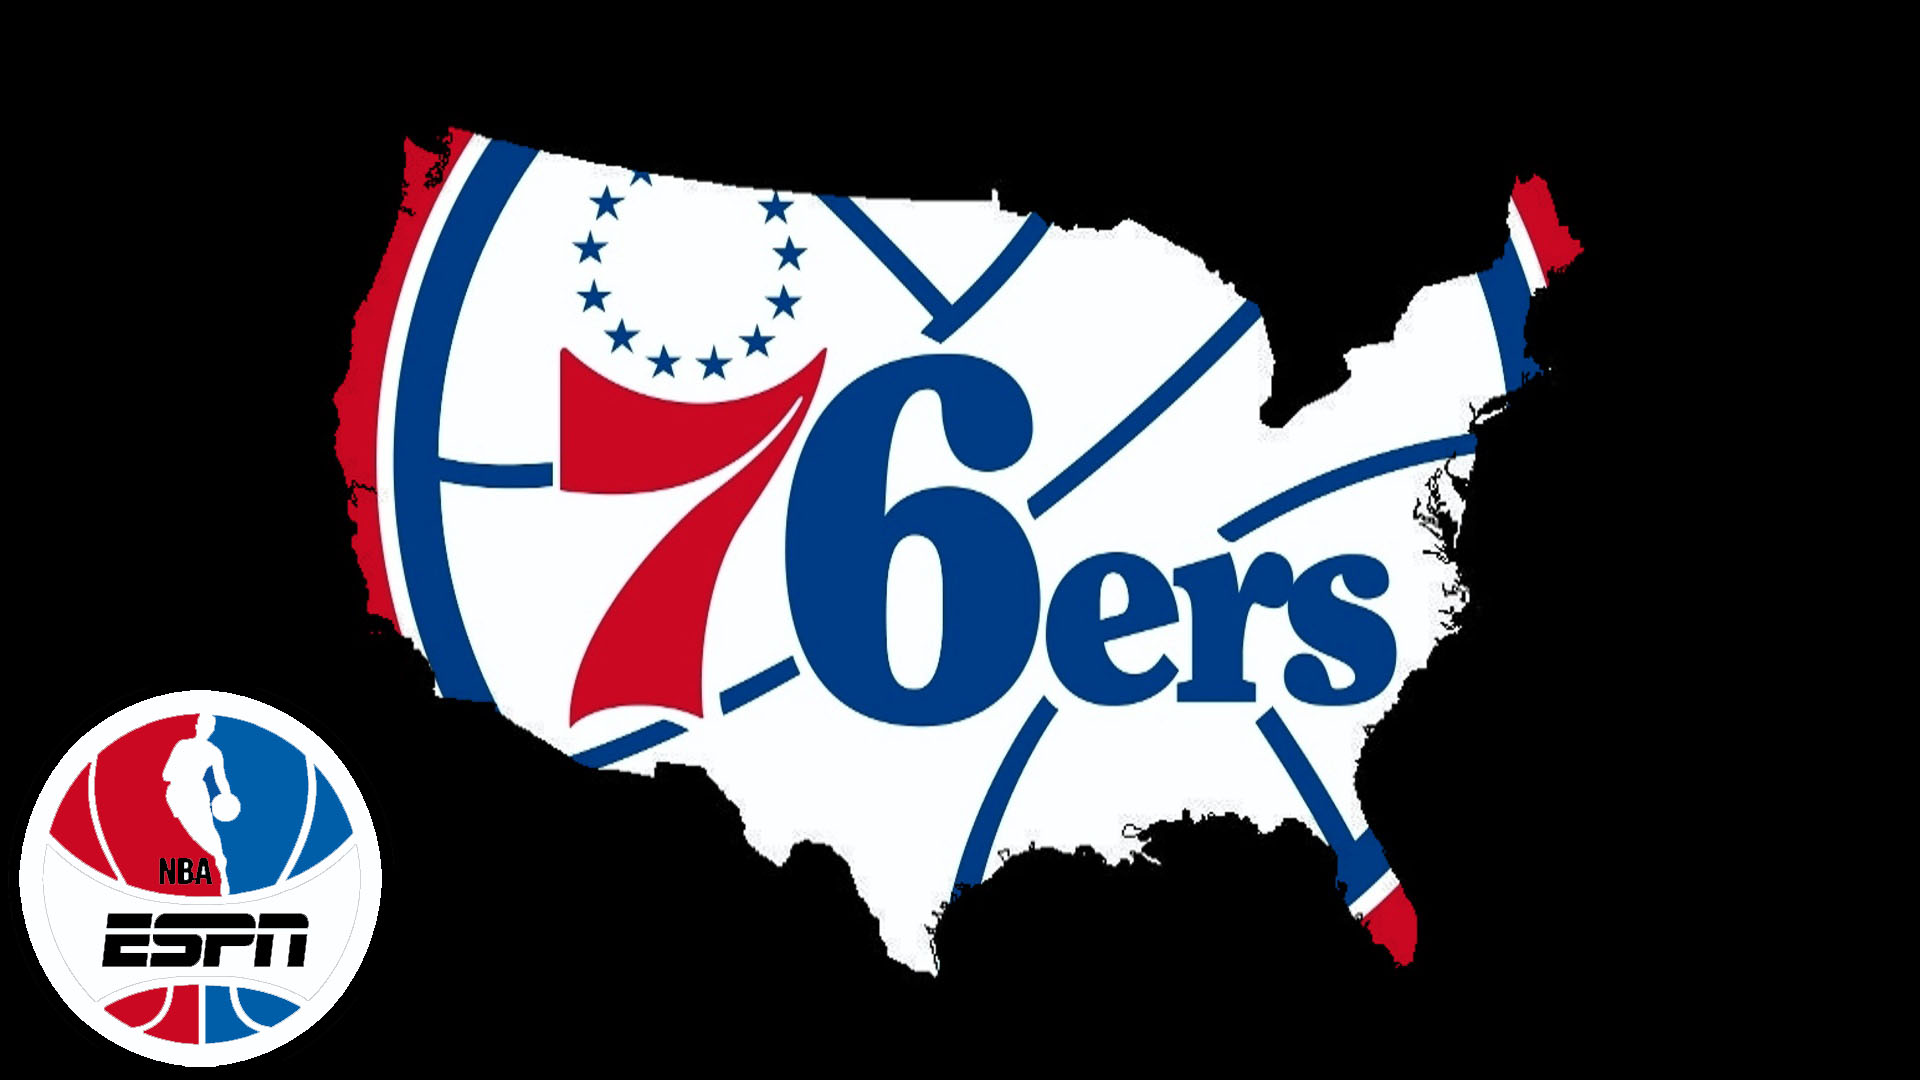 76ers Wallpaper Background